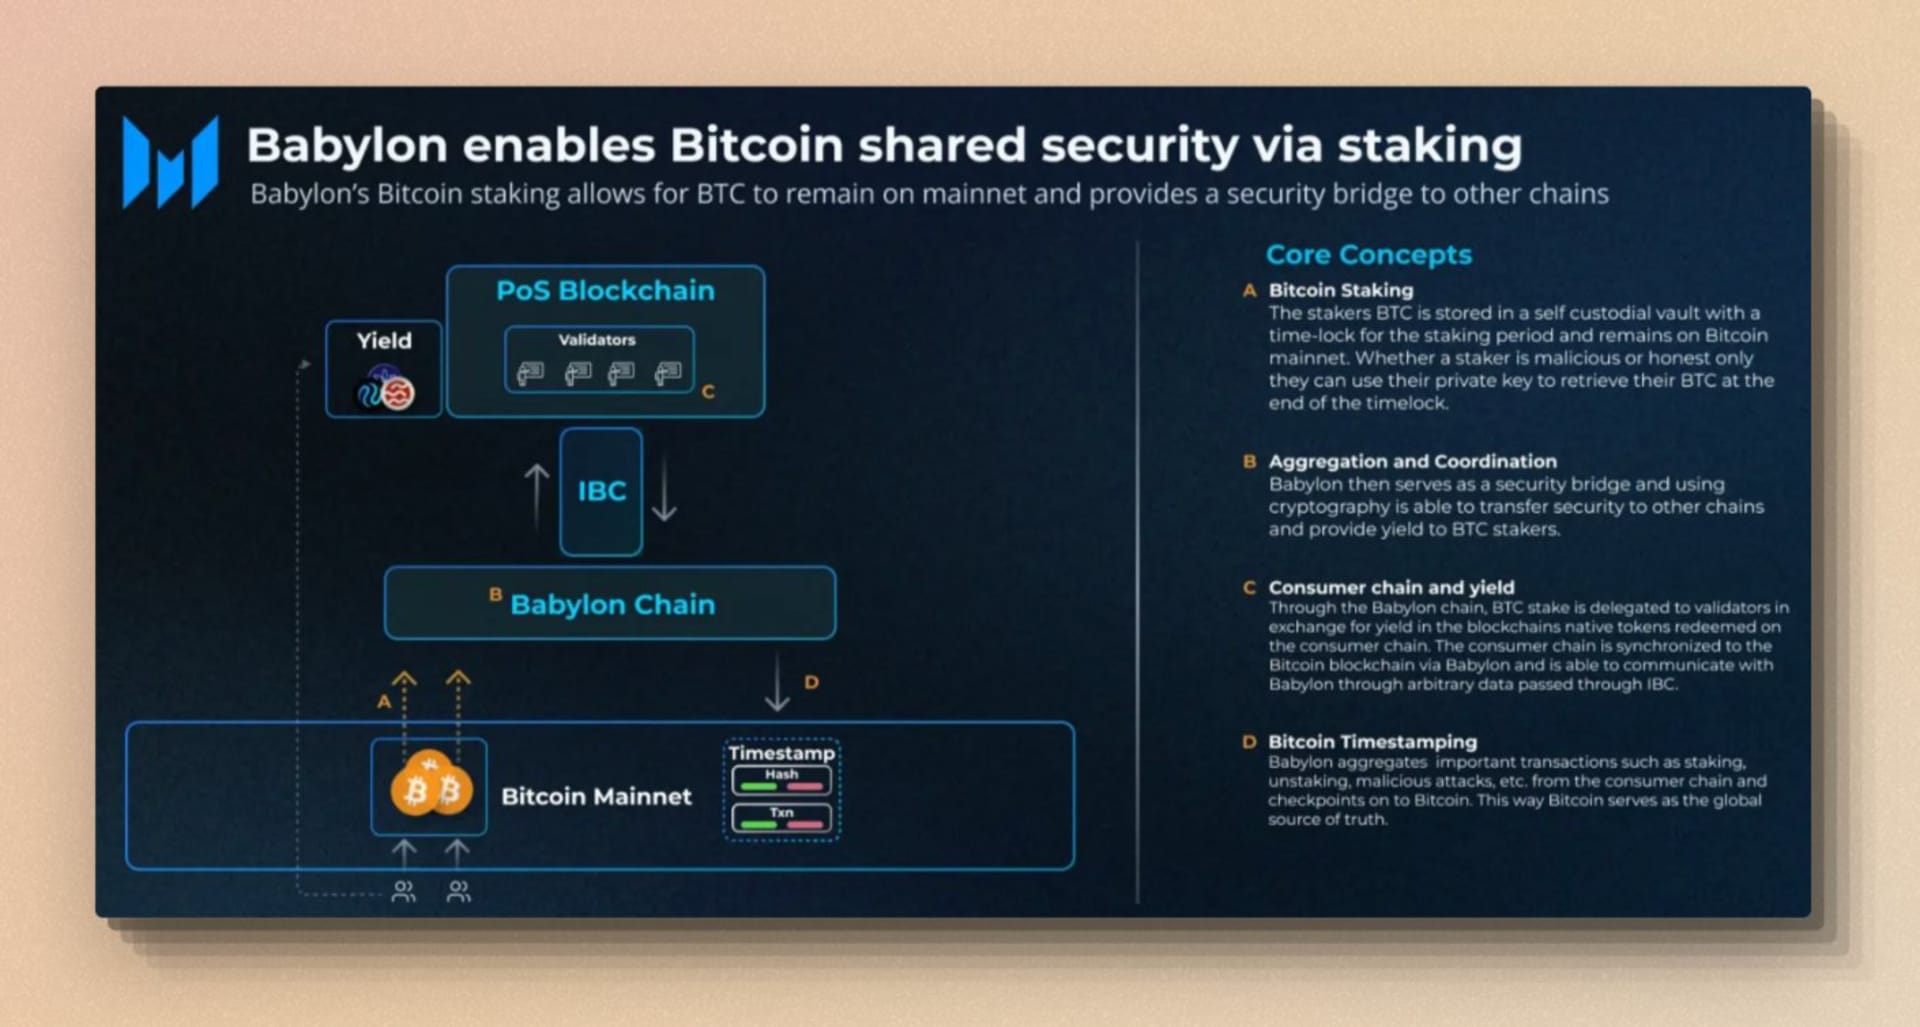 Babylon enables Bitcoin shared security via staking